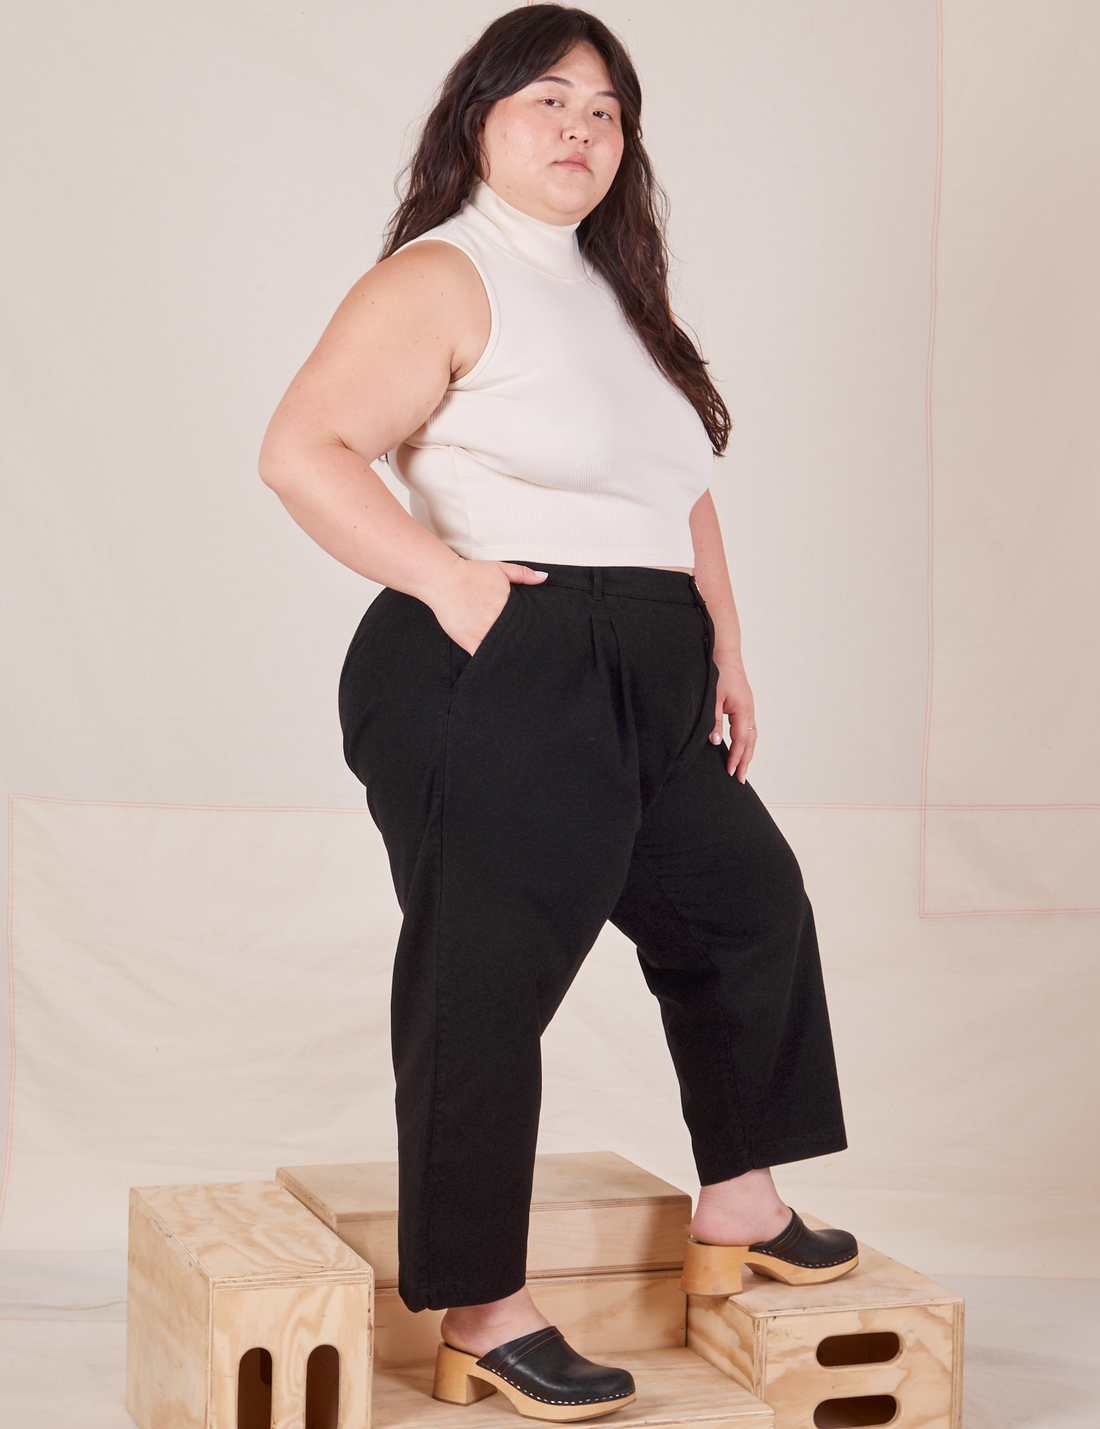 Side view of Heavyweight Trousers in Basic Black and vintage off-white Sleeveless Turtleneck worn by Ashley.